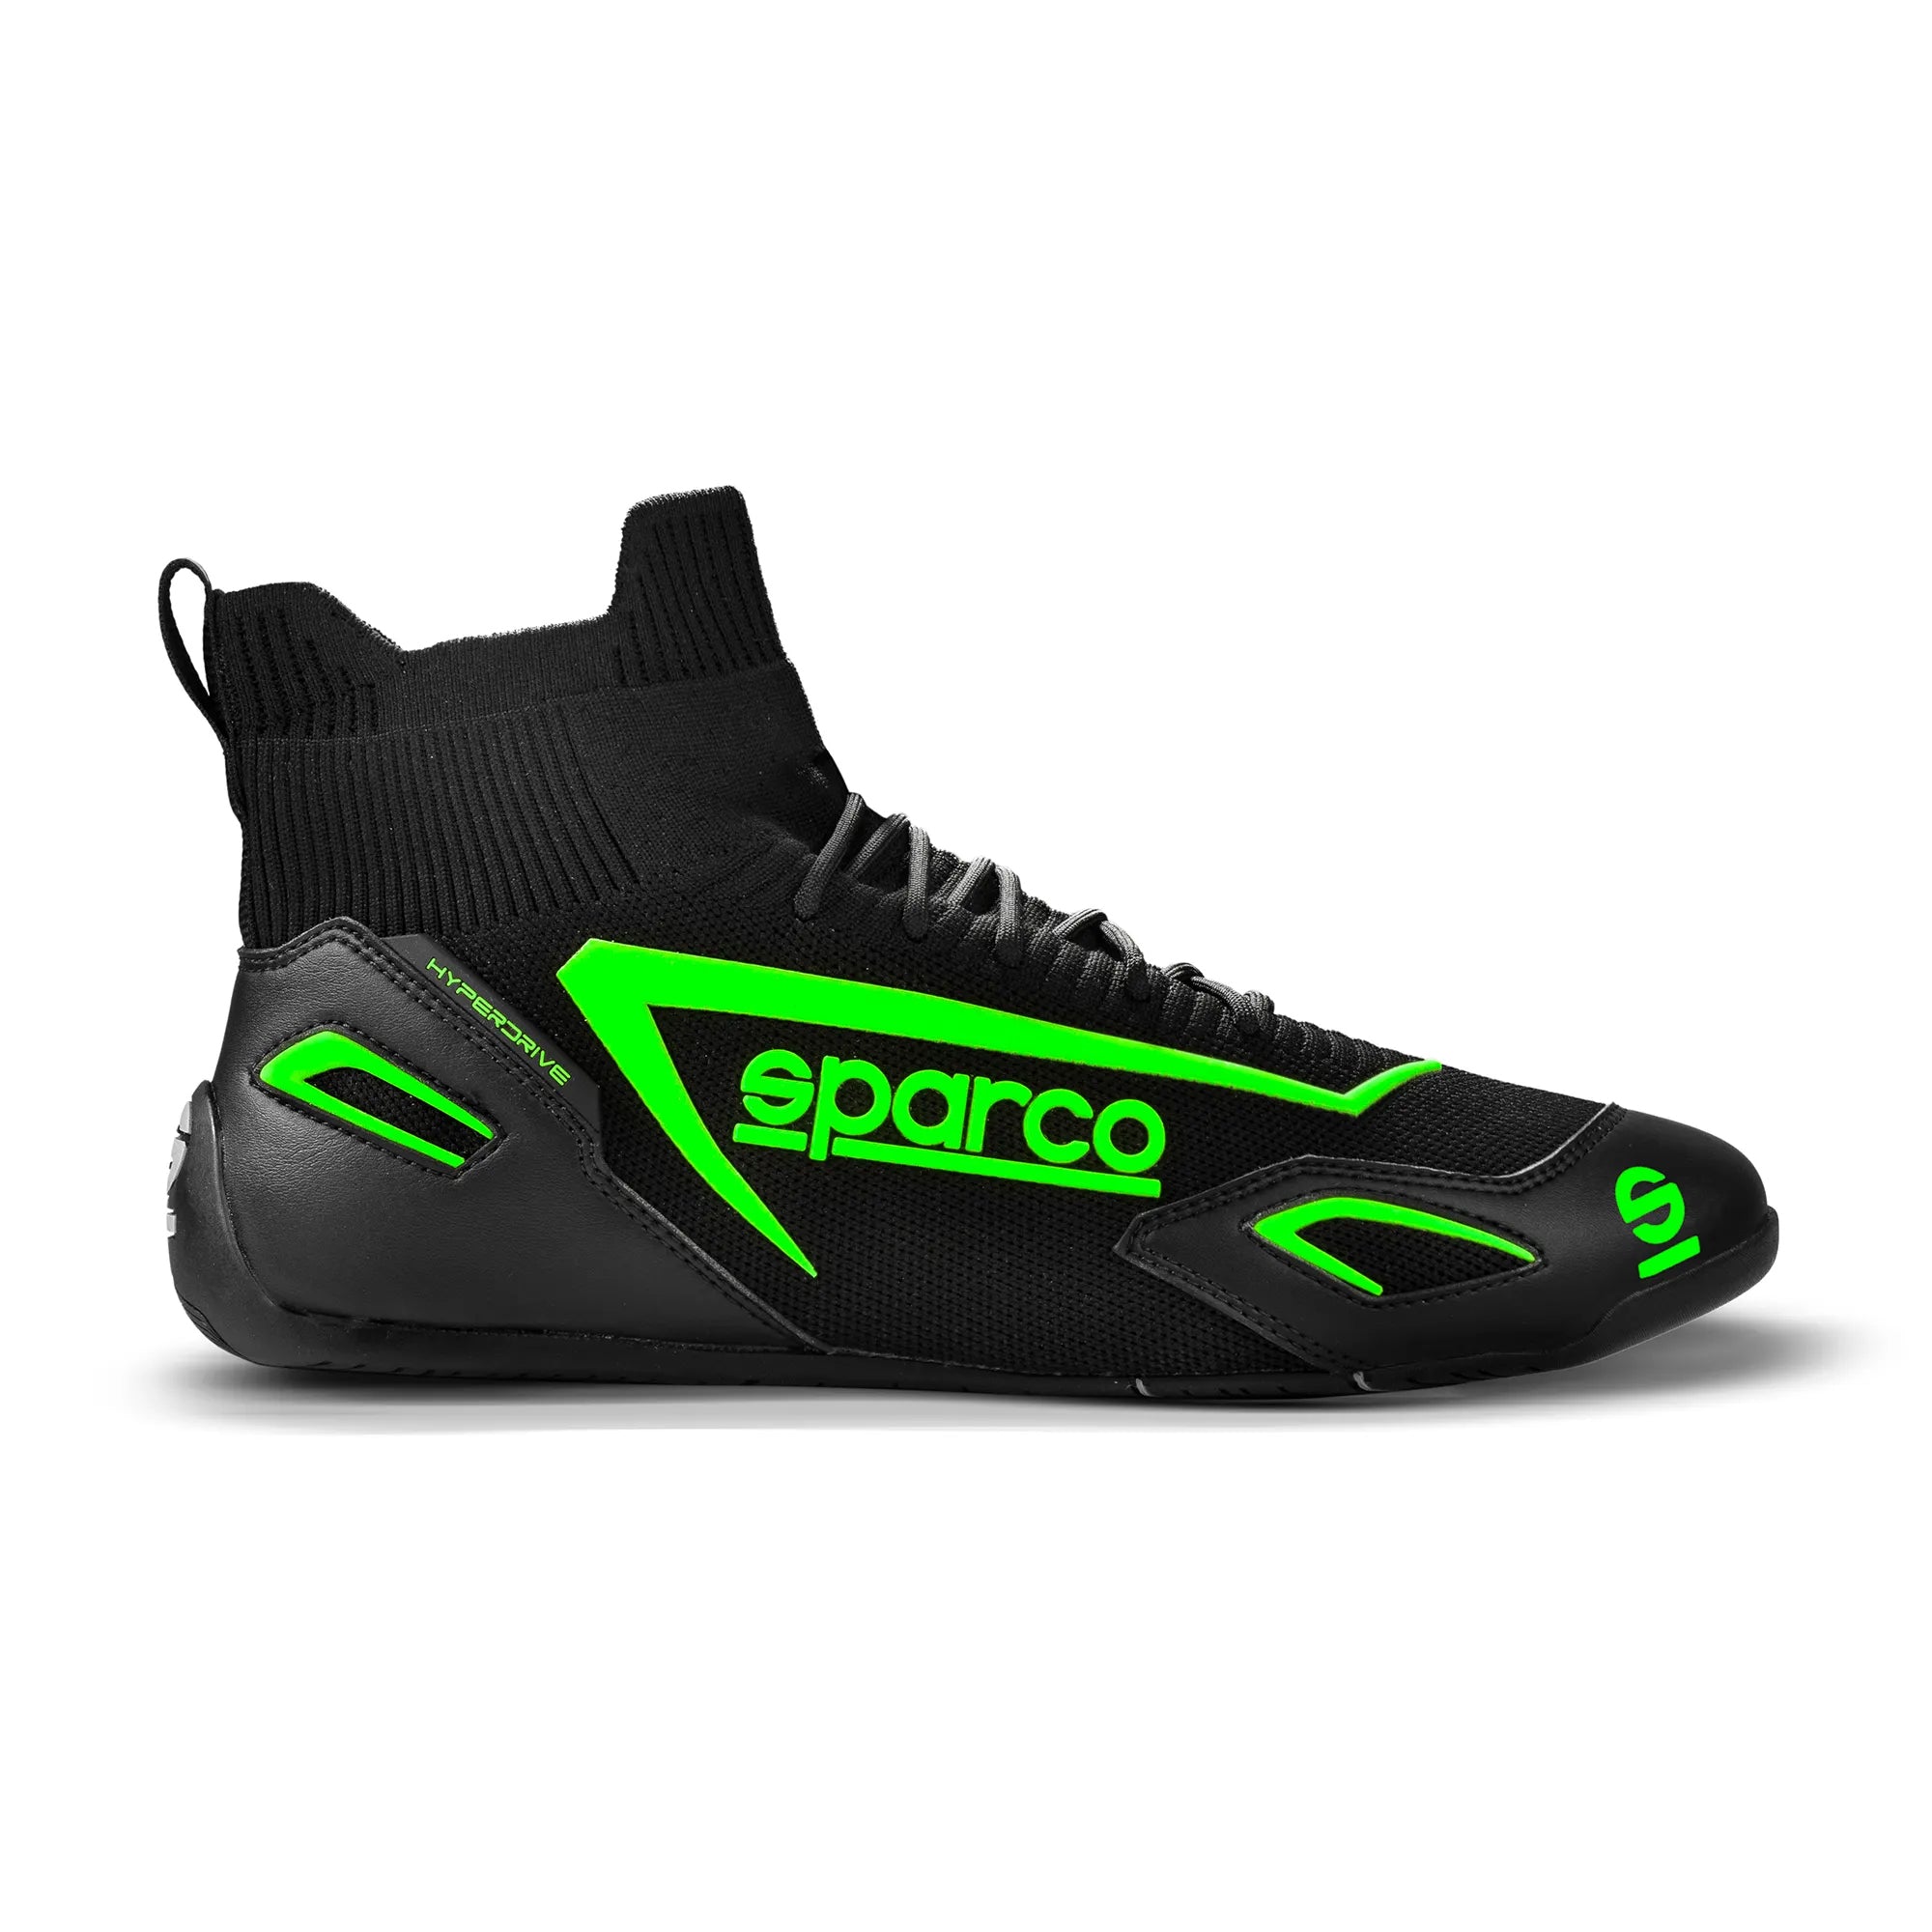 SPARCO 00129344NRVF Gaming sim racing shoes HYPERDRIVE, black/green, size 44 Photo-0 